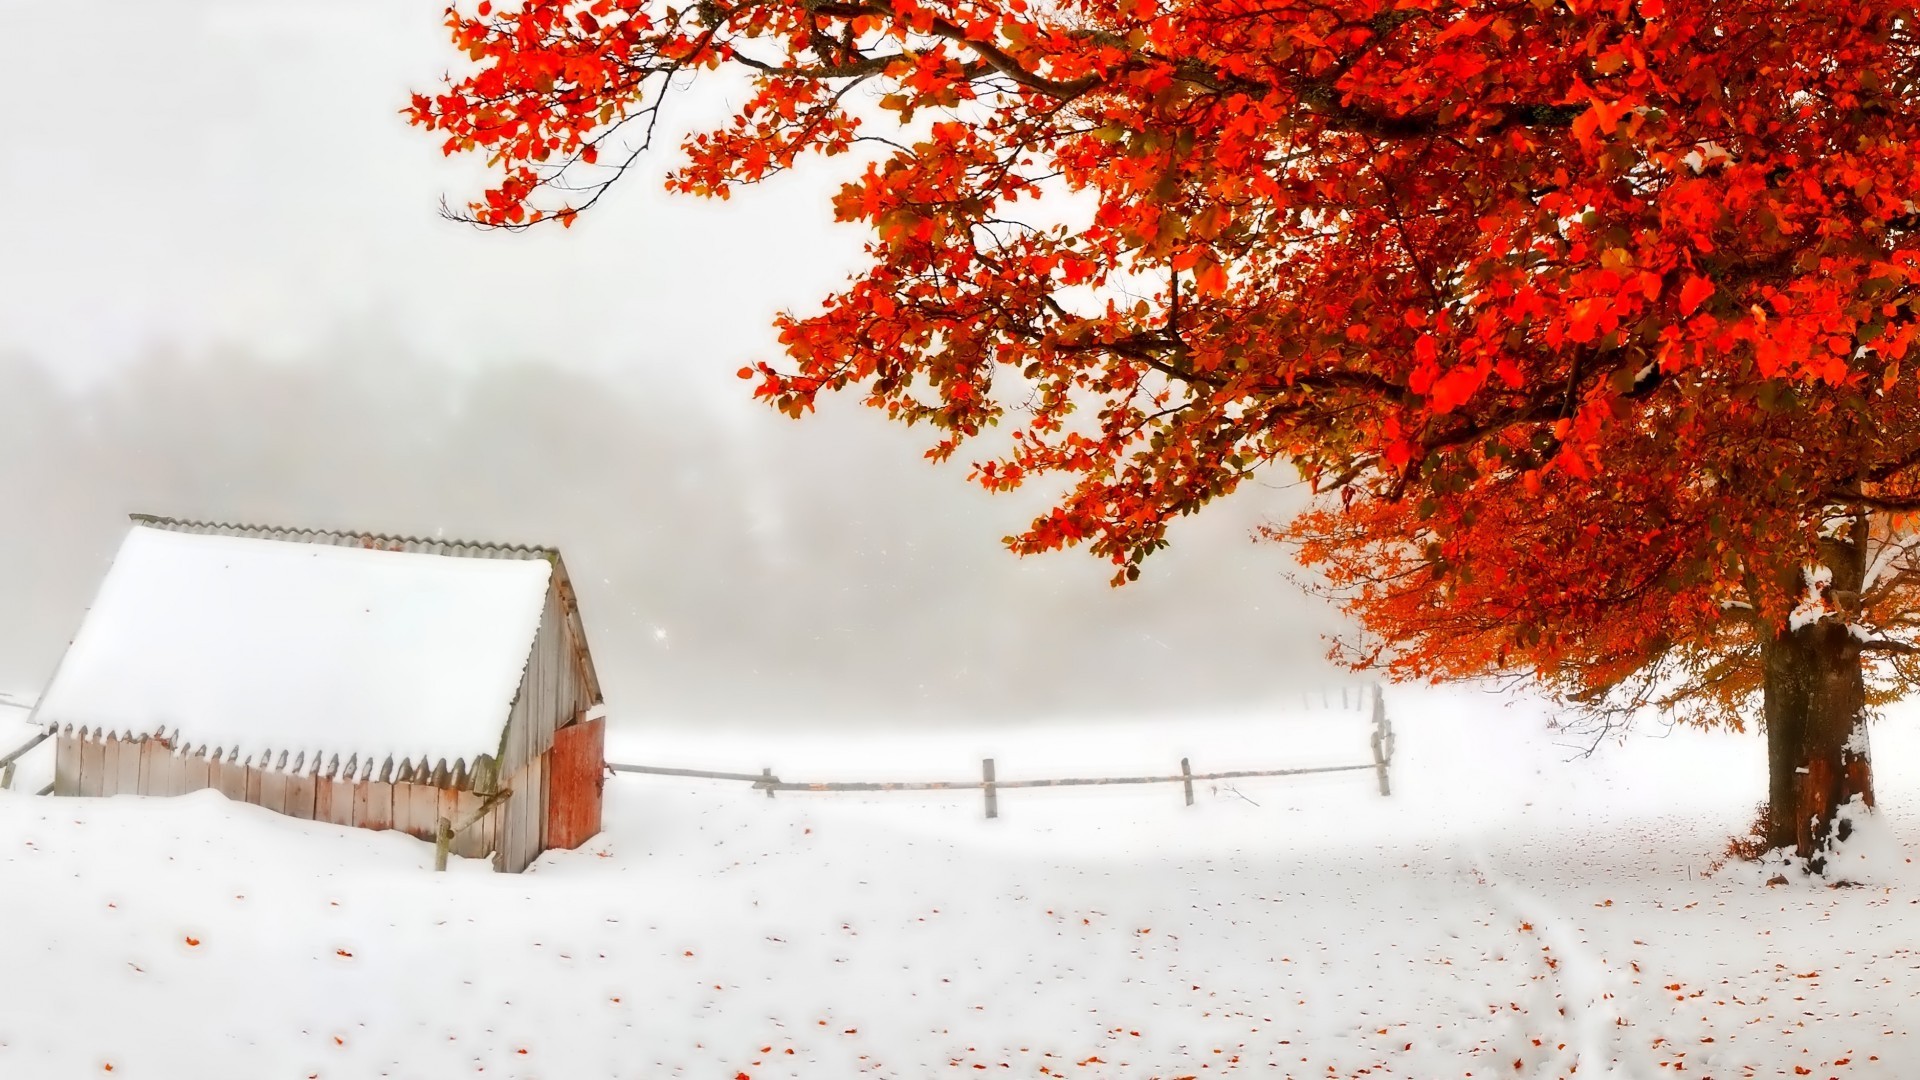 1920x1080 Shack Tag - Red Countryside Shack Early Snow Autumn Storm Winter Tree  Leaves Free Desktop Backgrounds